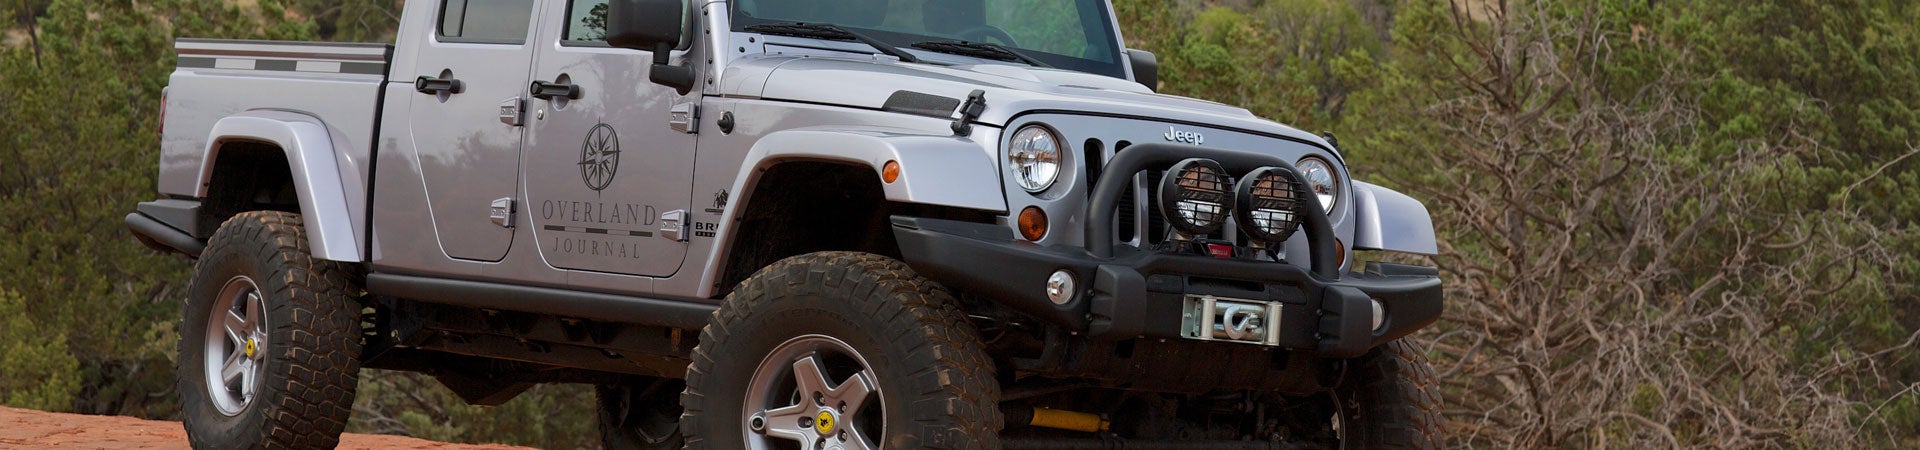 CDJRDemo1 | Derwood, MD | American Expedition Vehicles Authorized Dealer